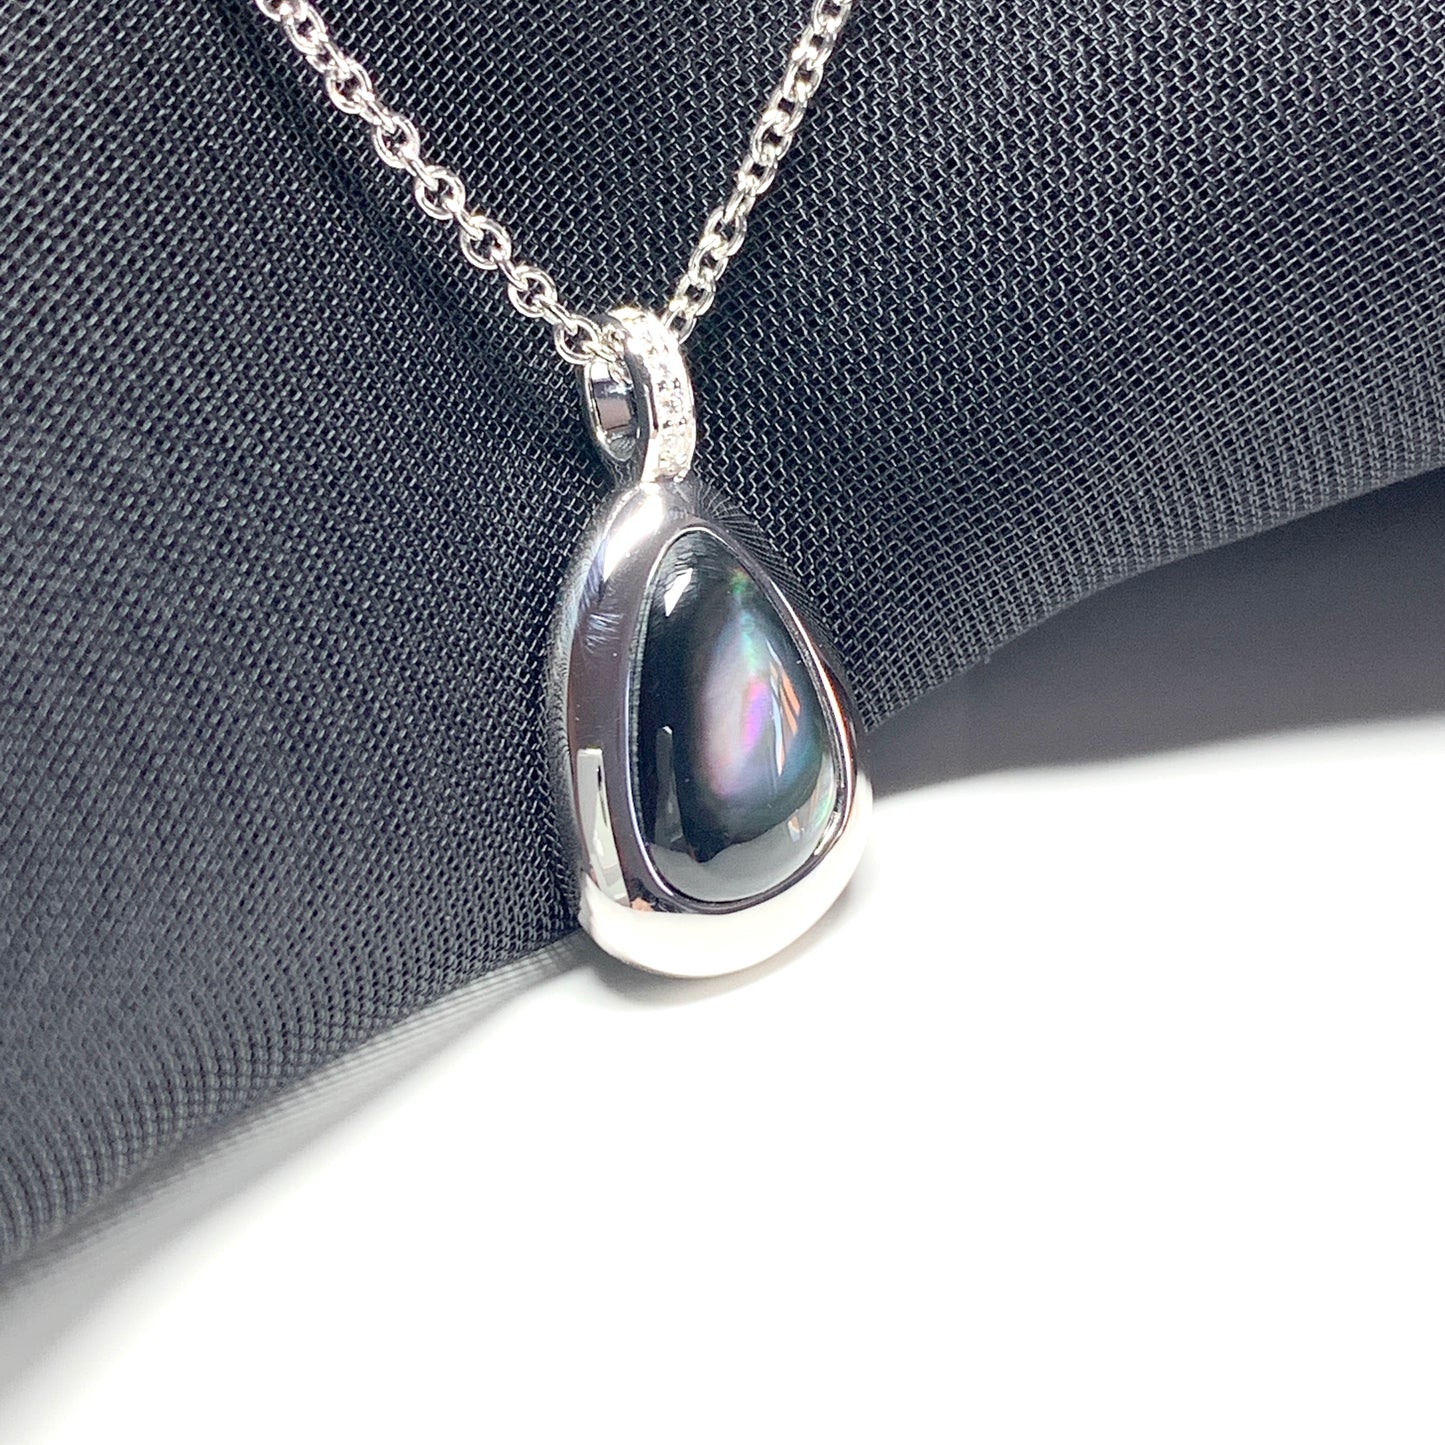 Black Mother of Pearl Pear Shaped Sterling Silver Necklace